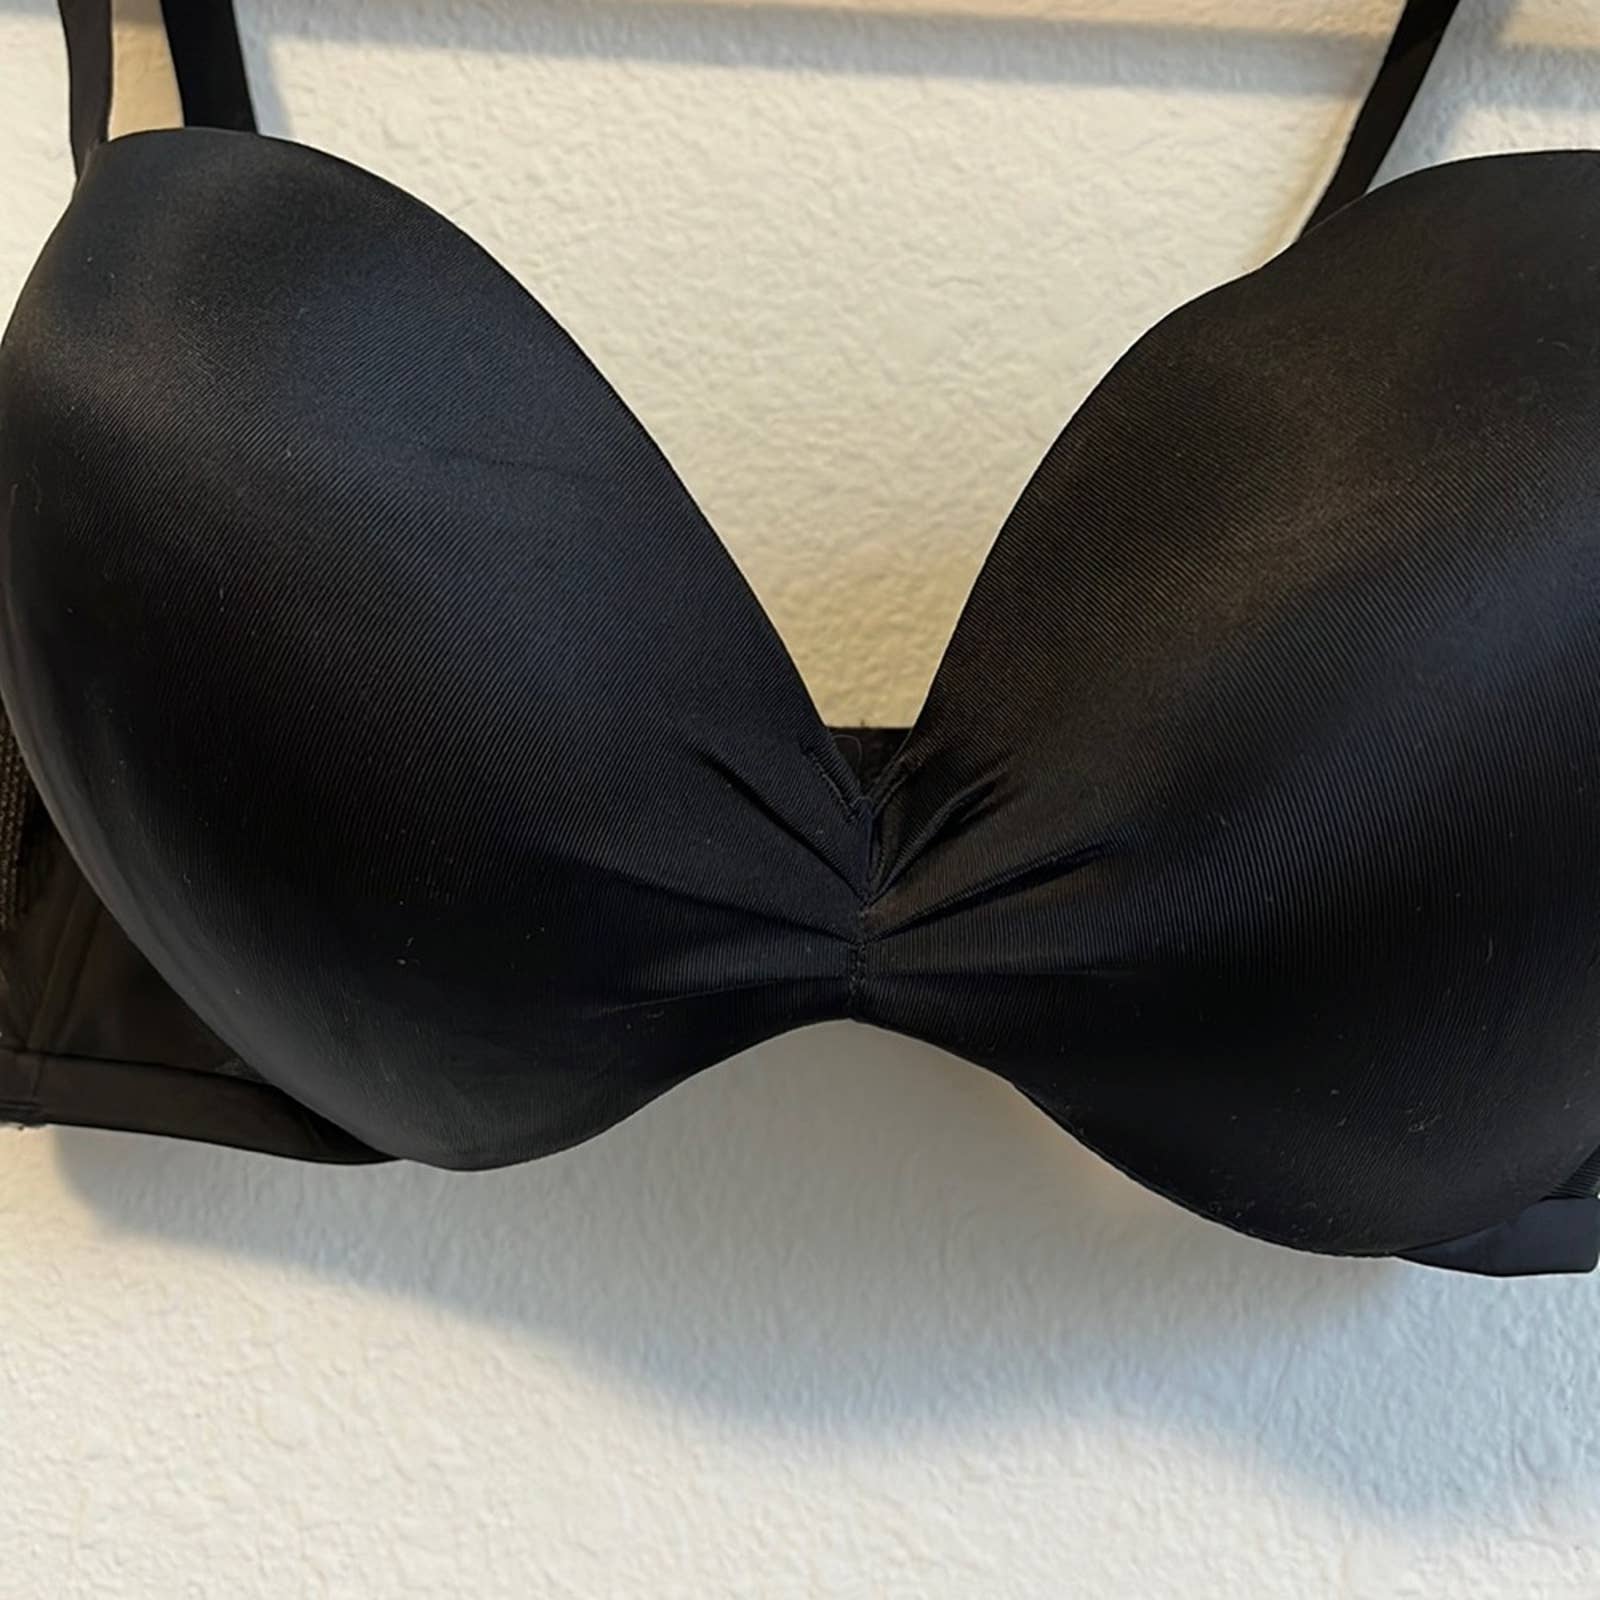 Cacique Bra Boost Balconette Size 46DD Black - $22 New With Tags - From  ThePoshJawn